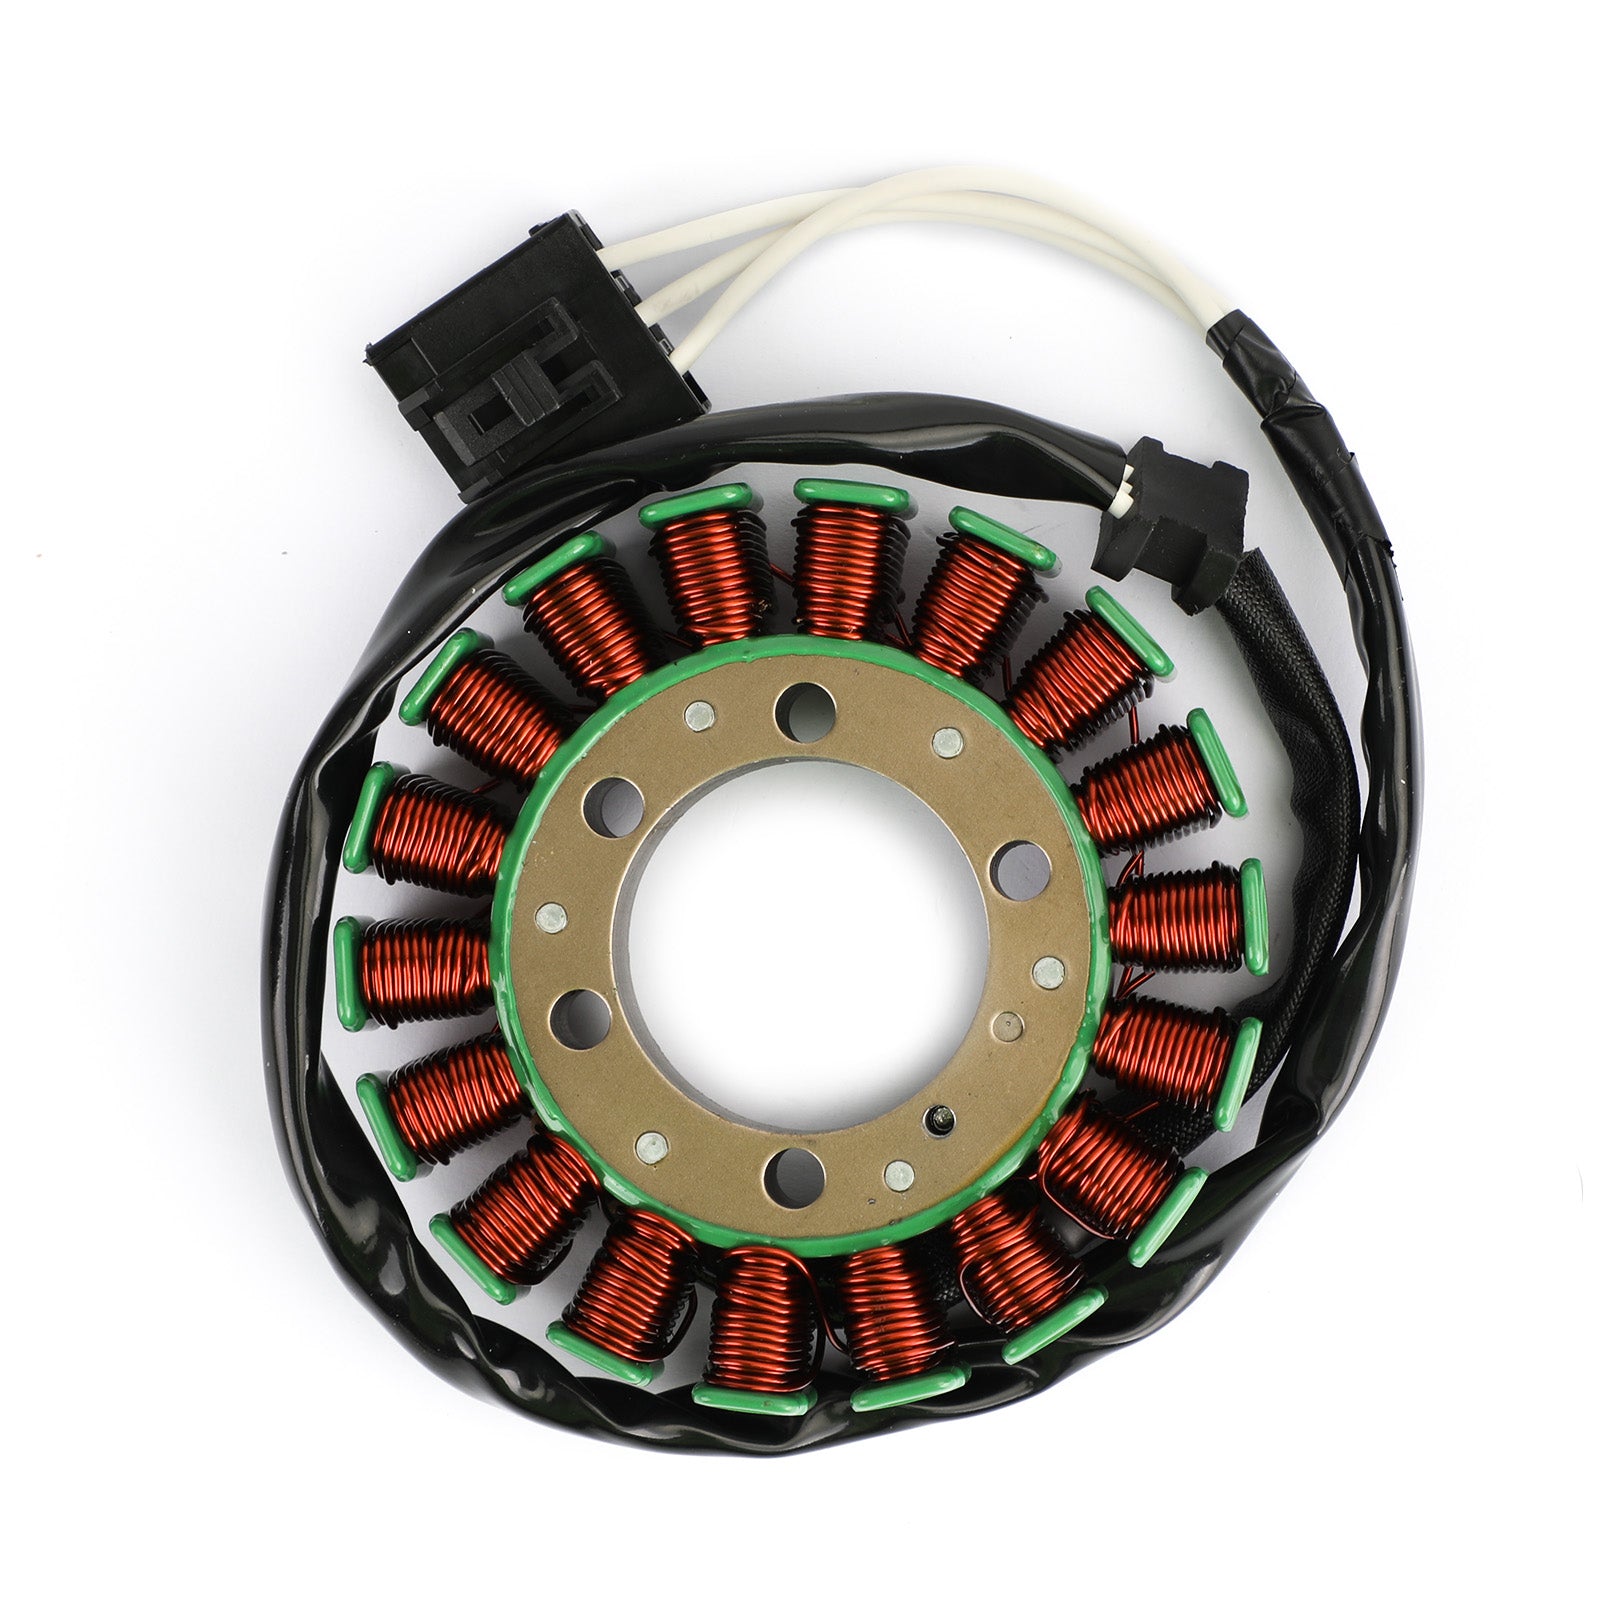 Magneto Generator Engine Stator Coil Fit For Kawasaki Z900 ABS 2017-2020 KLZ 1000 Versys 2012-2014